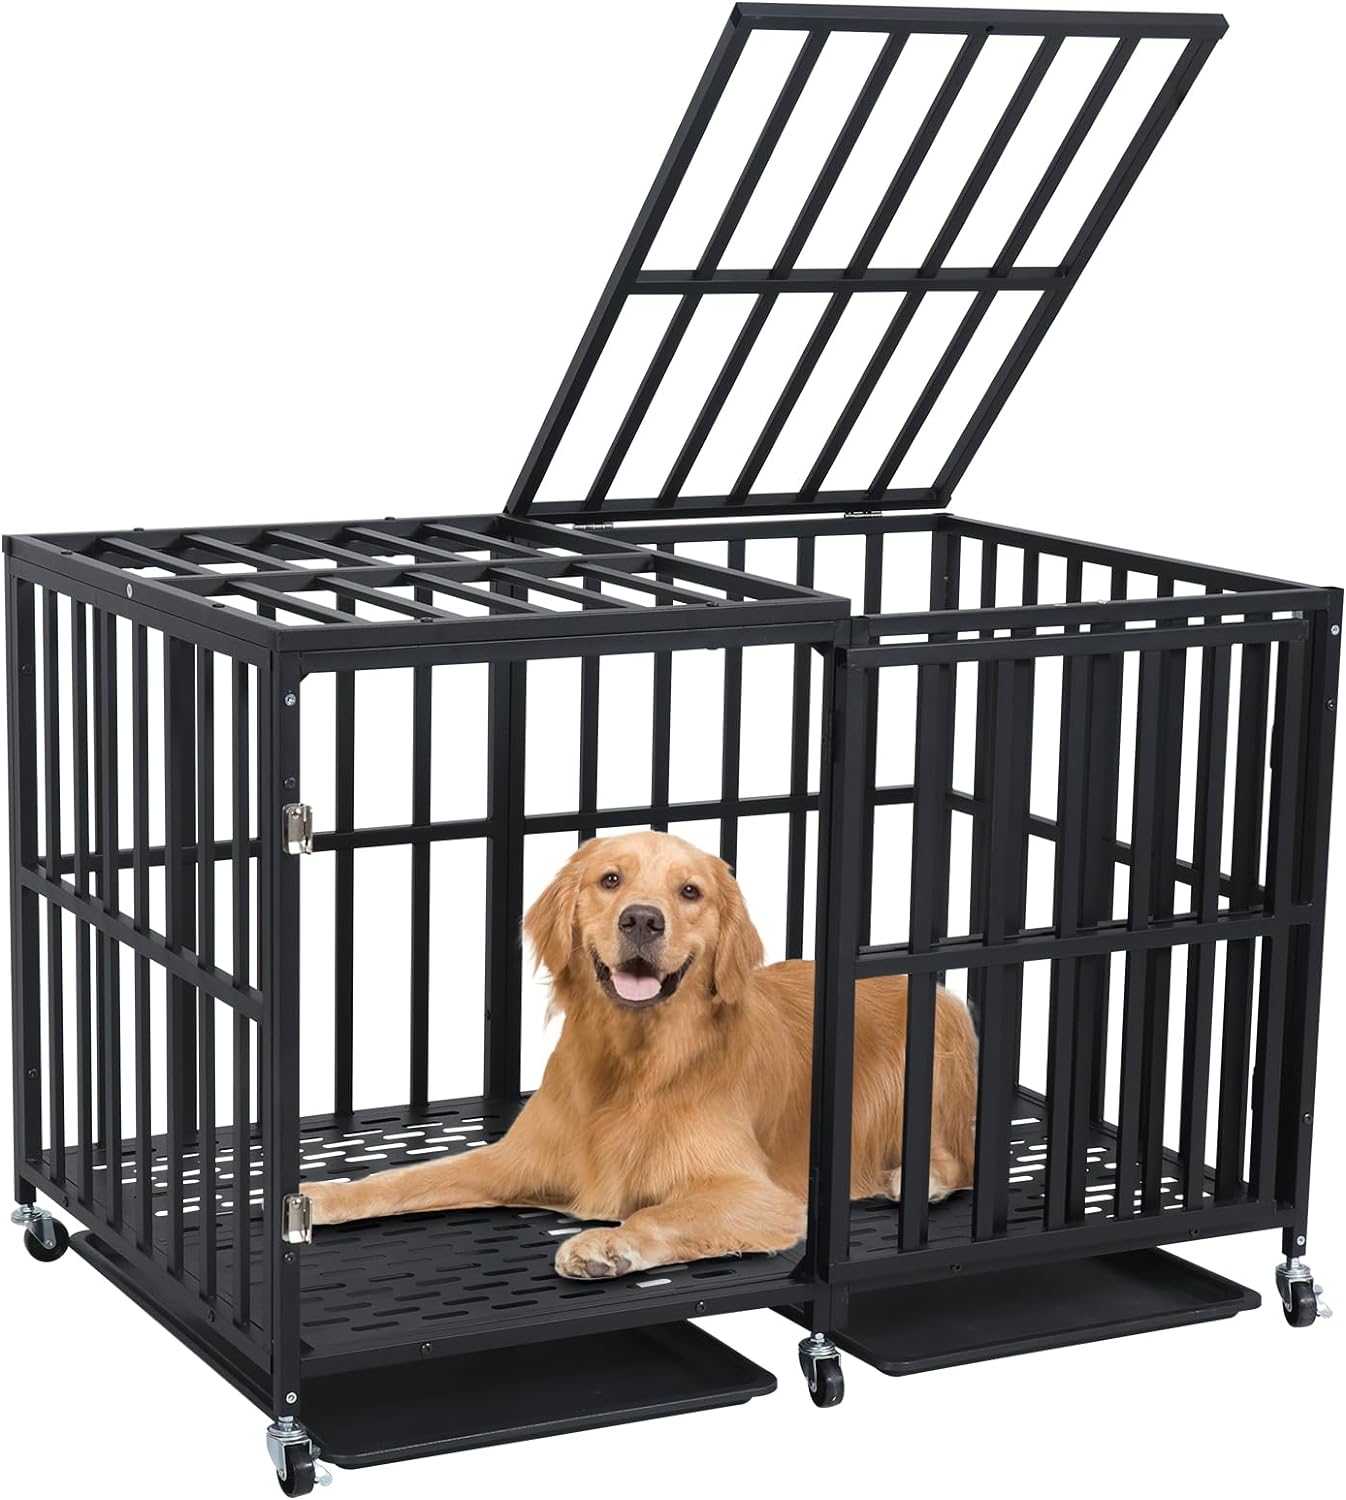 LUCKUP 48" Extra Large Heavy Duty Dog Crate Metal Dog Cage Kennel Indestructible W/Top Opening Locking Wheels and Removable Trays